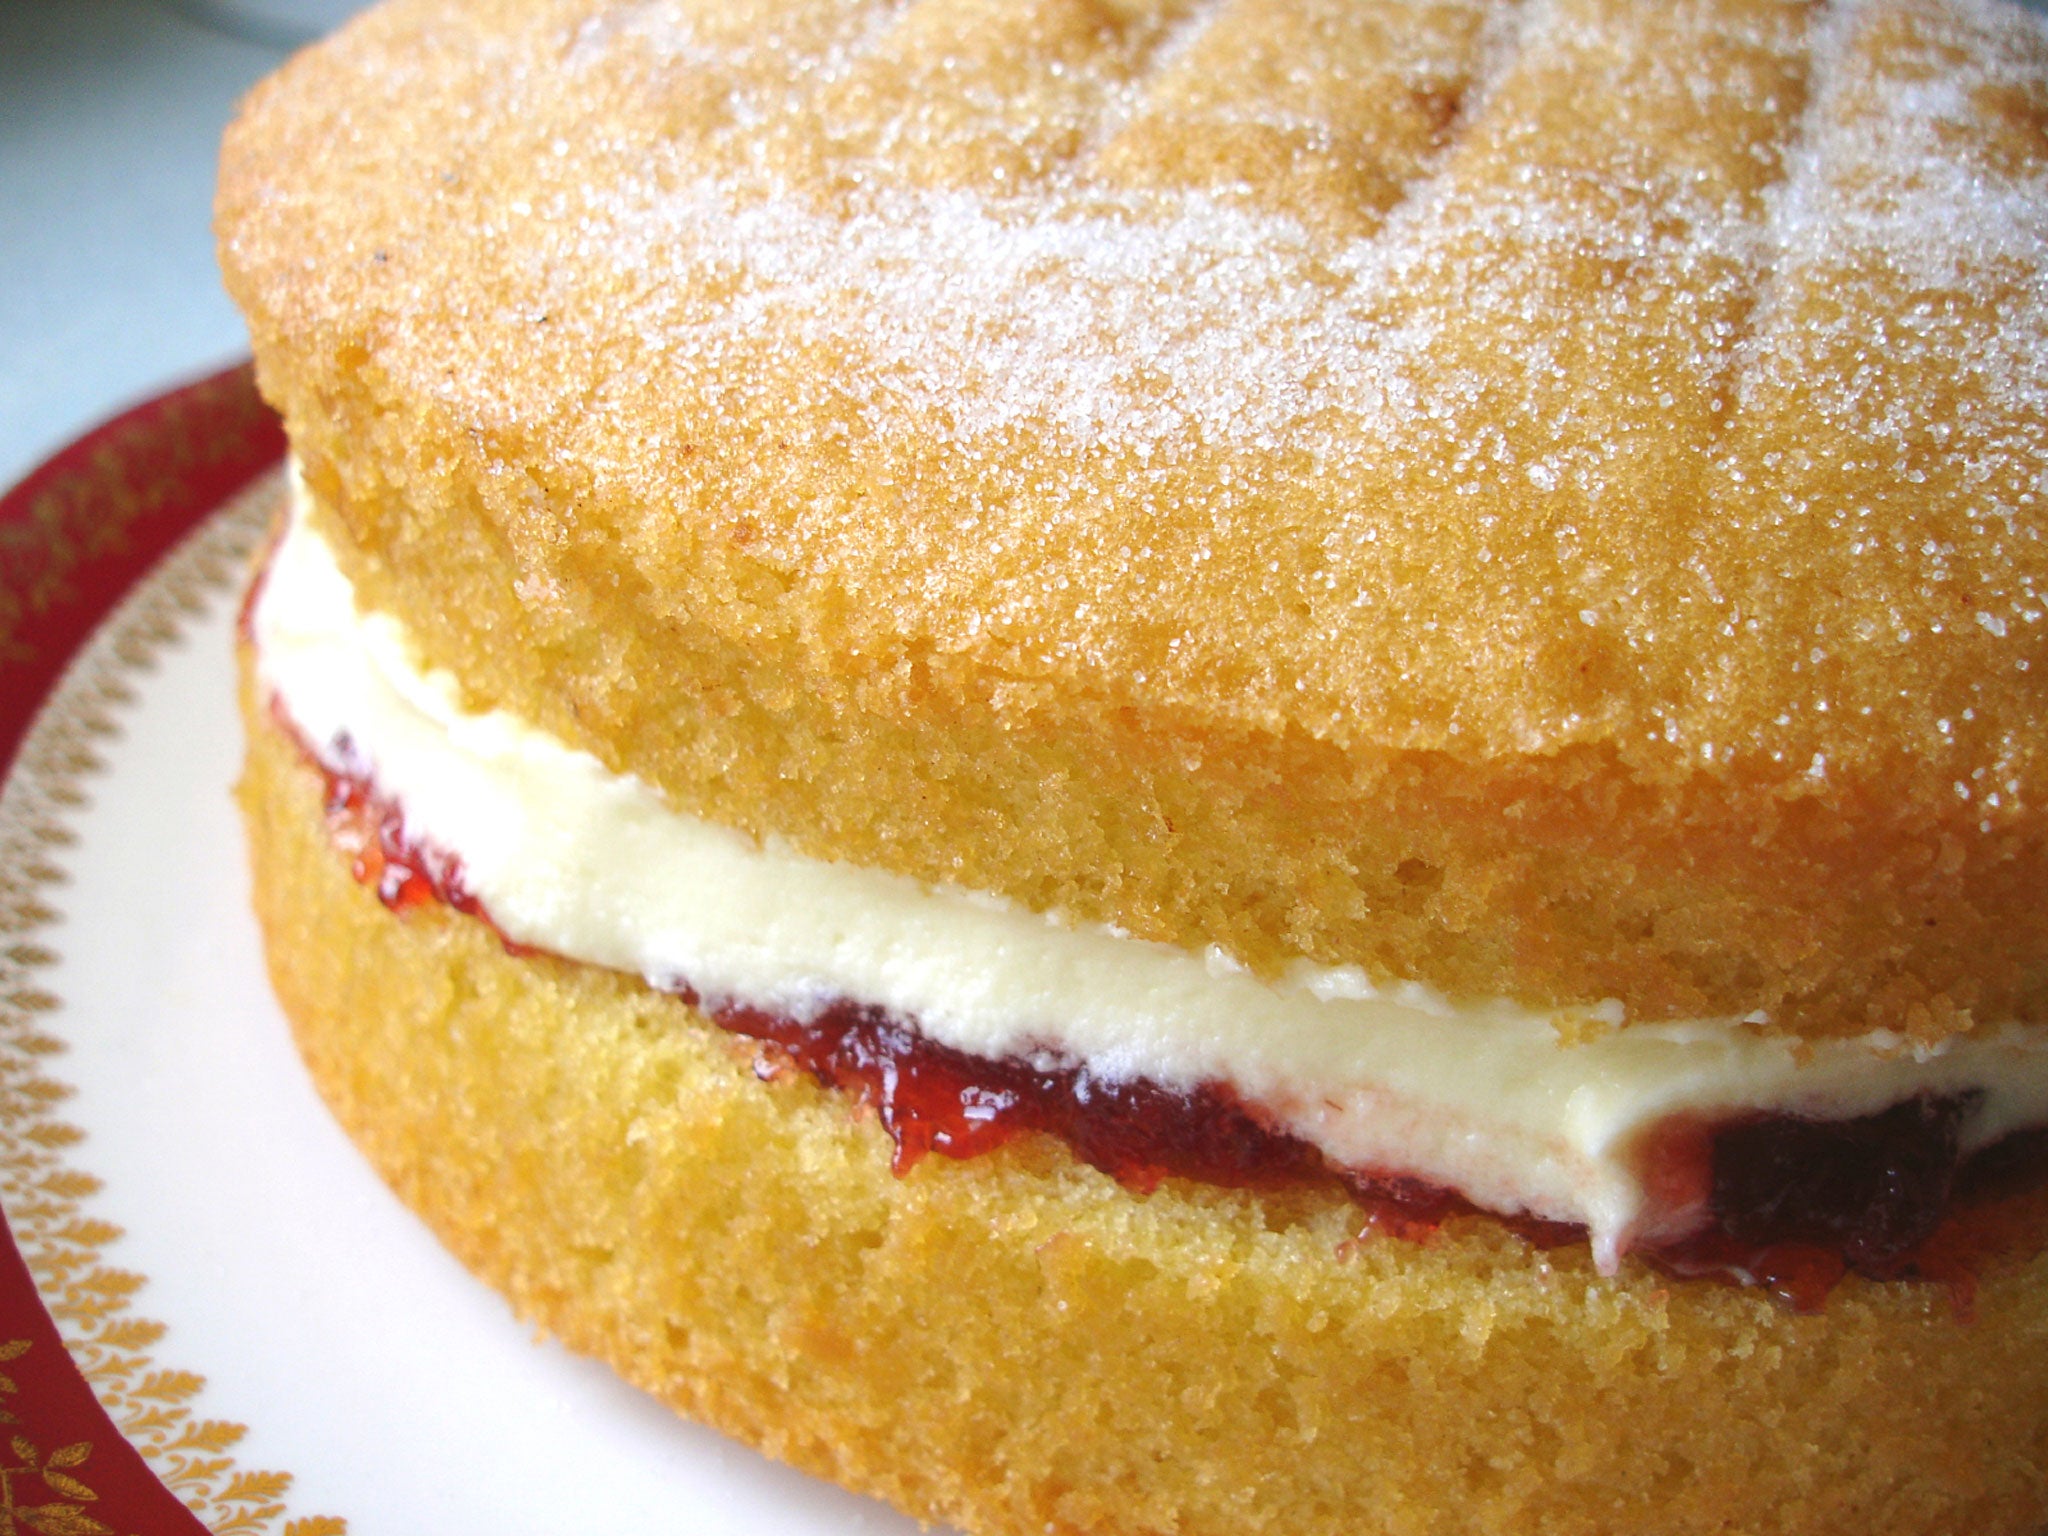 The Victoria sponge sandwich has become 'an emblem of national identity'